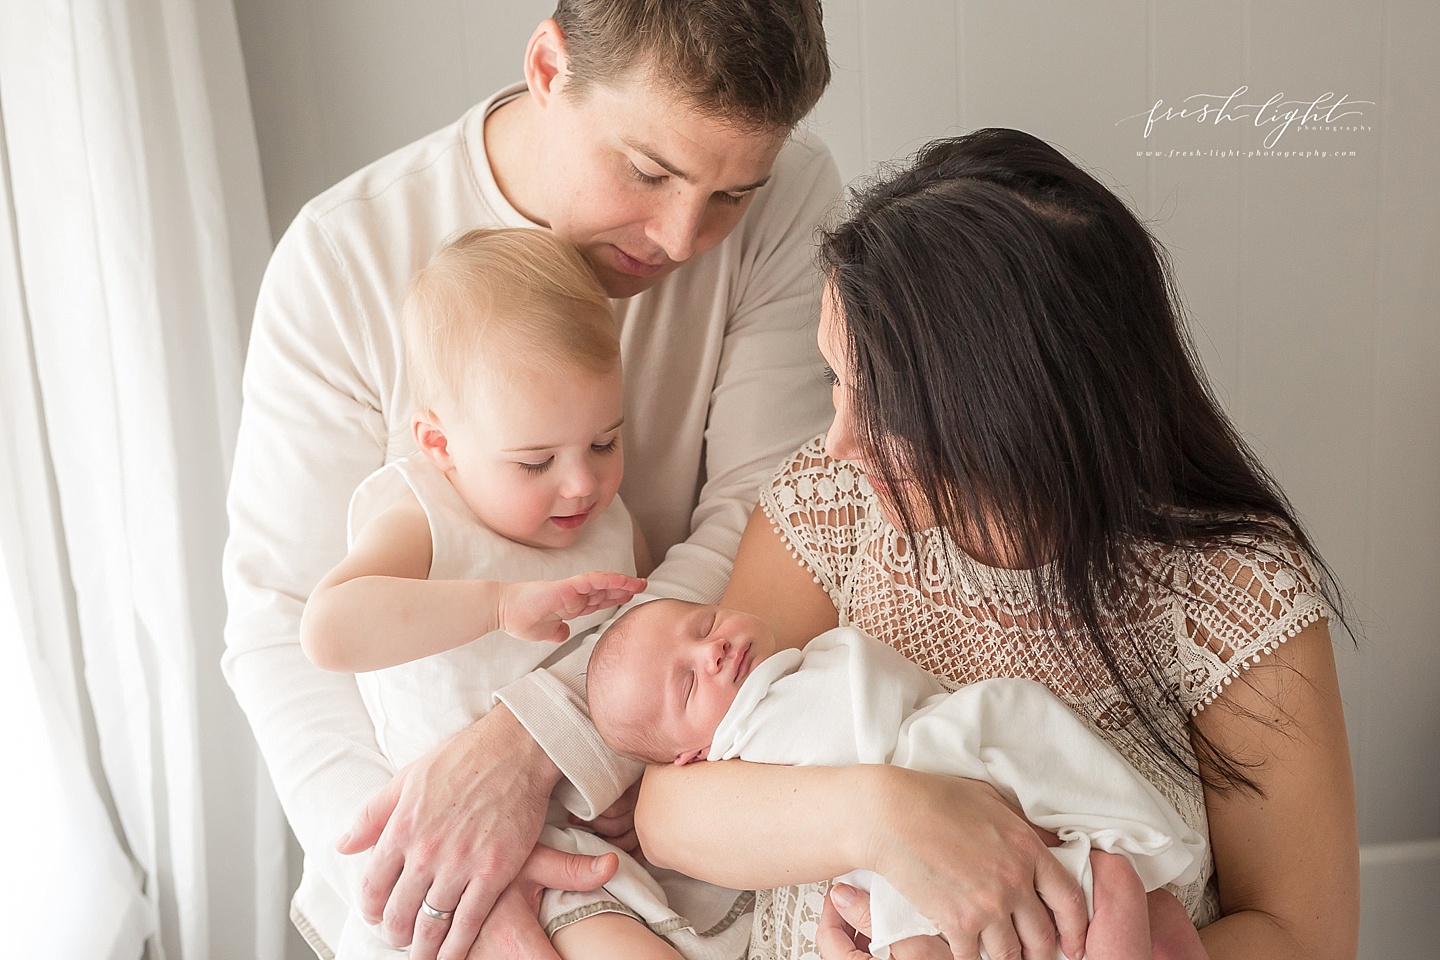 family picture with newborn and sister touching brother's head